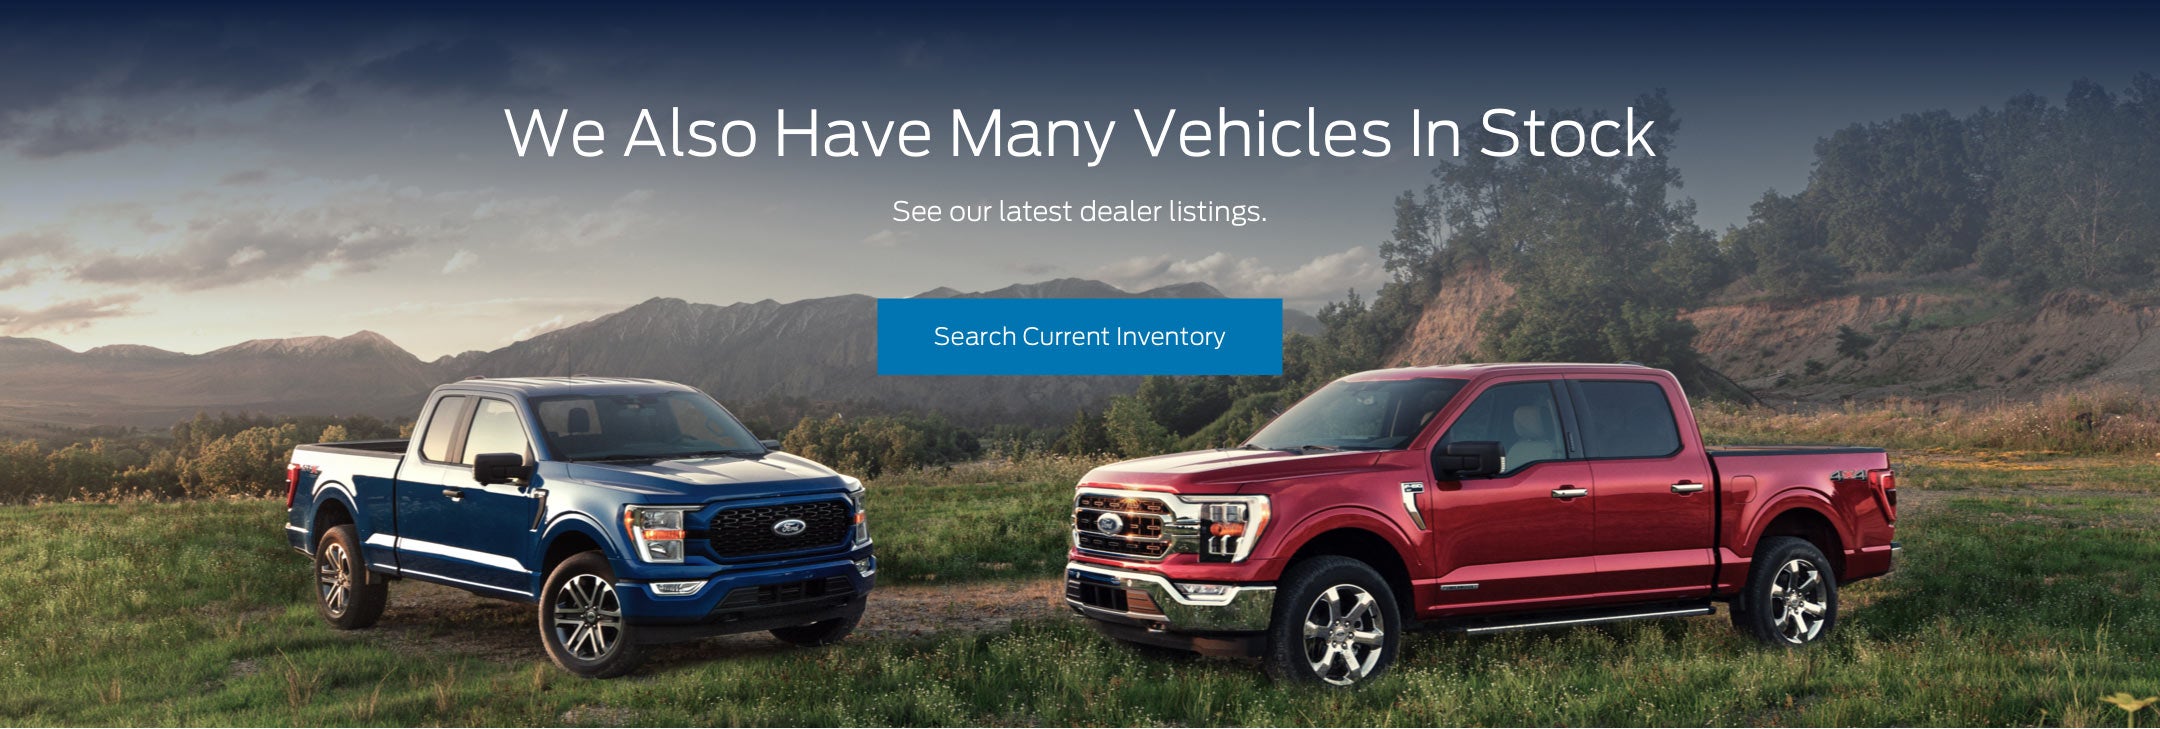 Ford vehicles in stock | Bud Shell Ford in Dexter MO